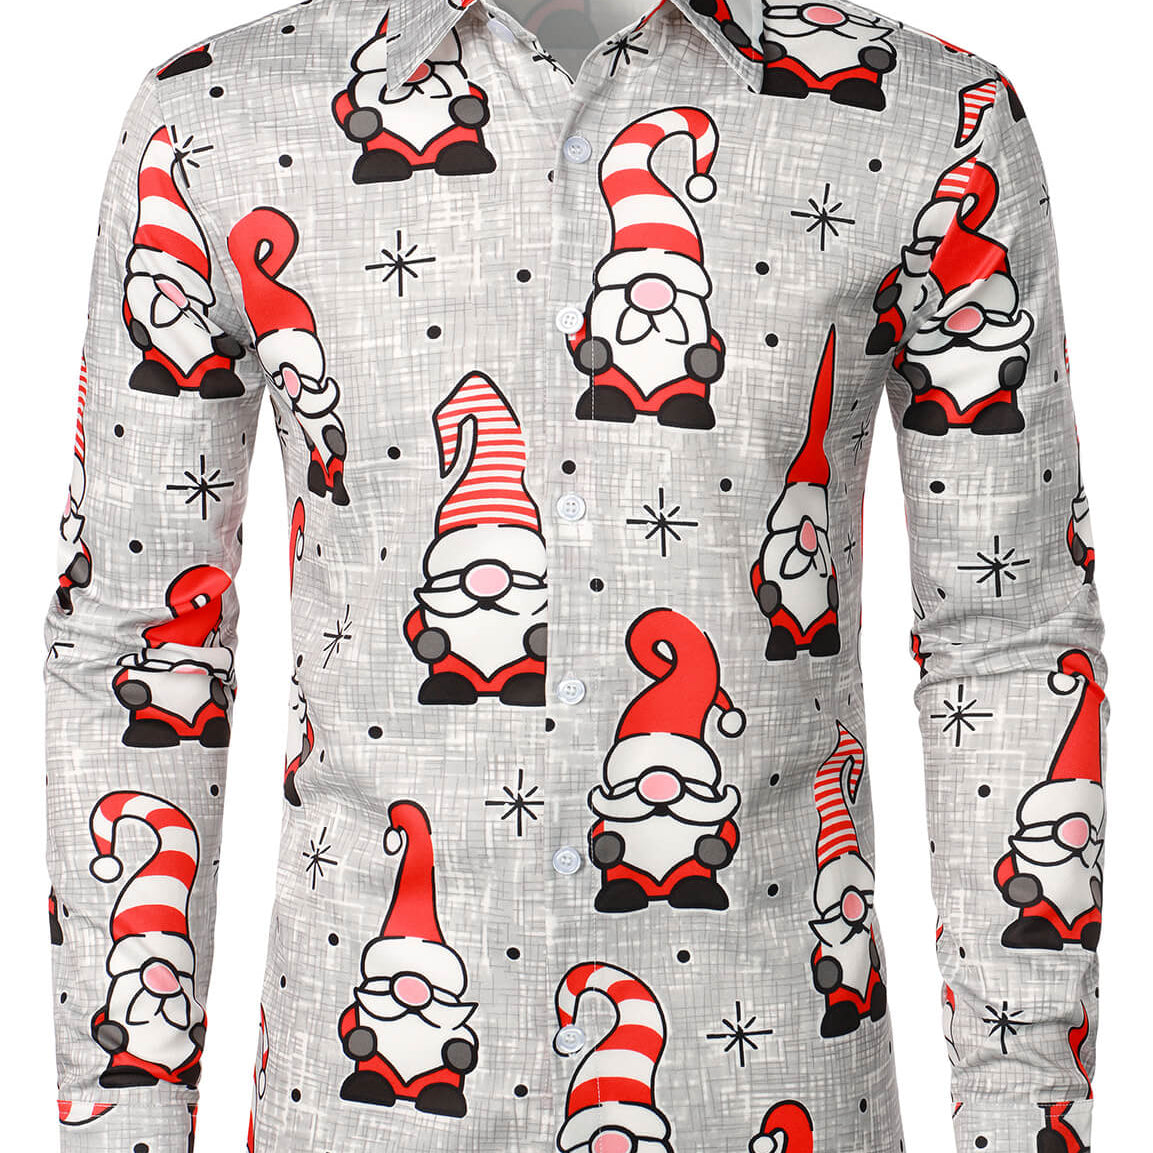 Men's Christmas Holiday Cute Gnome Print Funny Button Up Long Sleeve Shirt